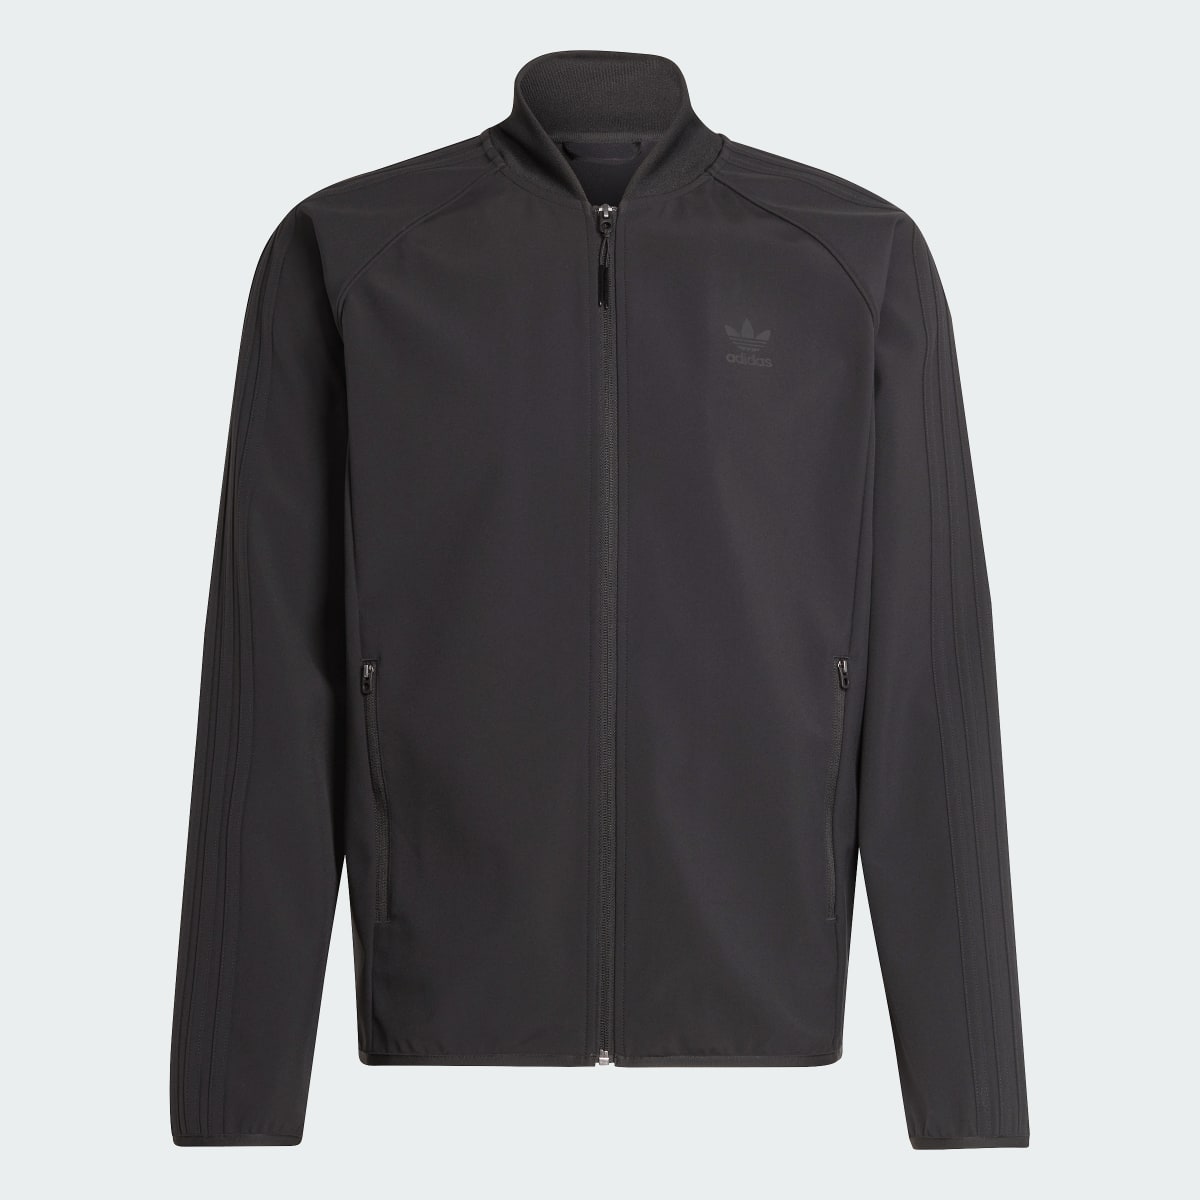 Adidas Track top SST Bonded. 5